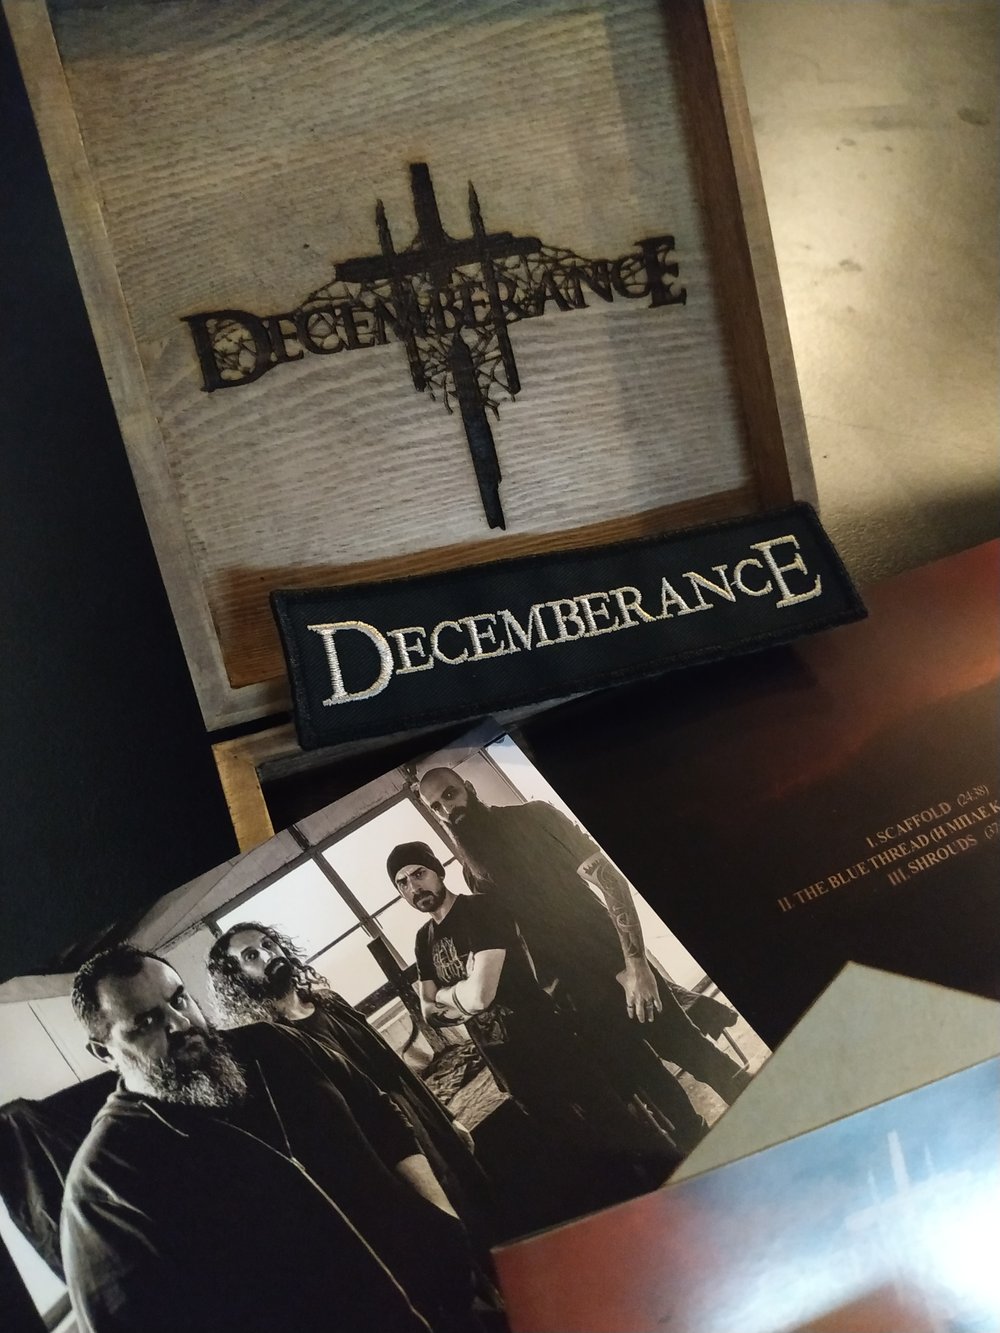 DECEMBERANCE - "Implosions" (RB29) CD in wooden box - 90 copies